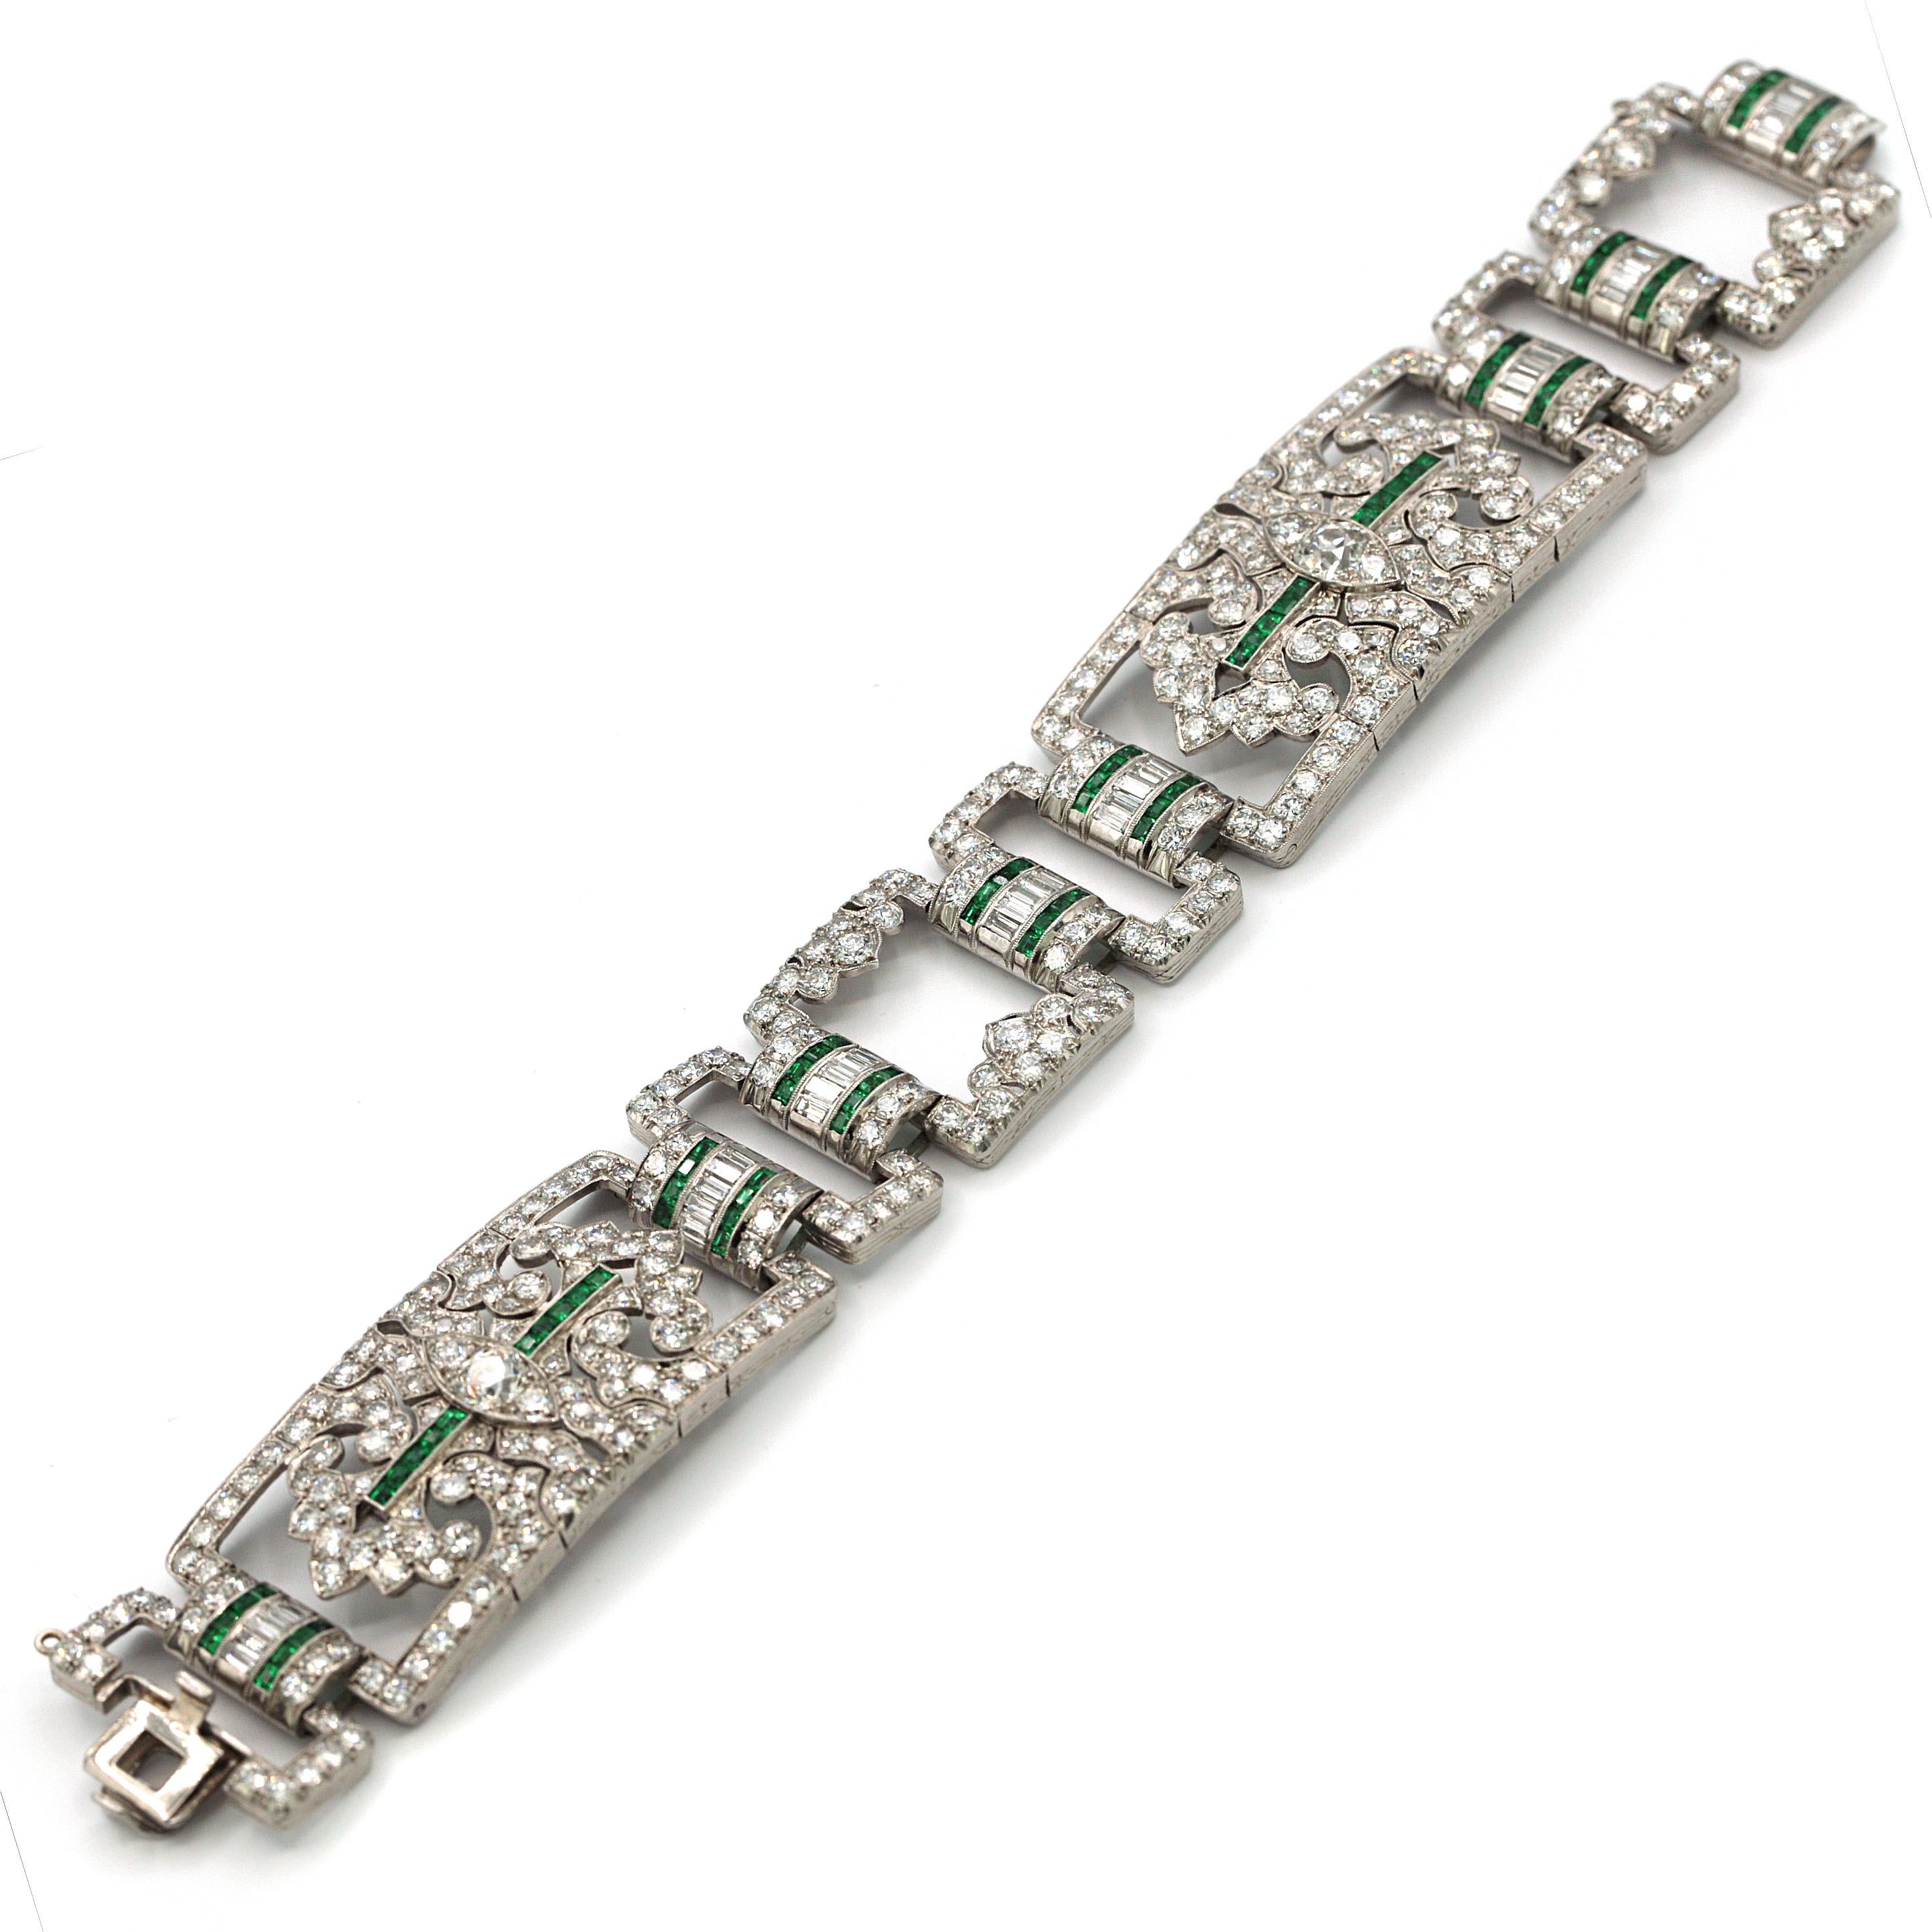 This stunning ArtDeco Platinum Bracelet features over 17.50 carats of white round and baggutte diamonds along with square cut green Emeralds, and flawless workmanship. 
beautiful details and articulated design.
19.5cm in length and 2.3cm in